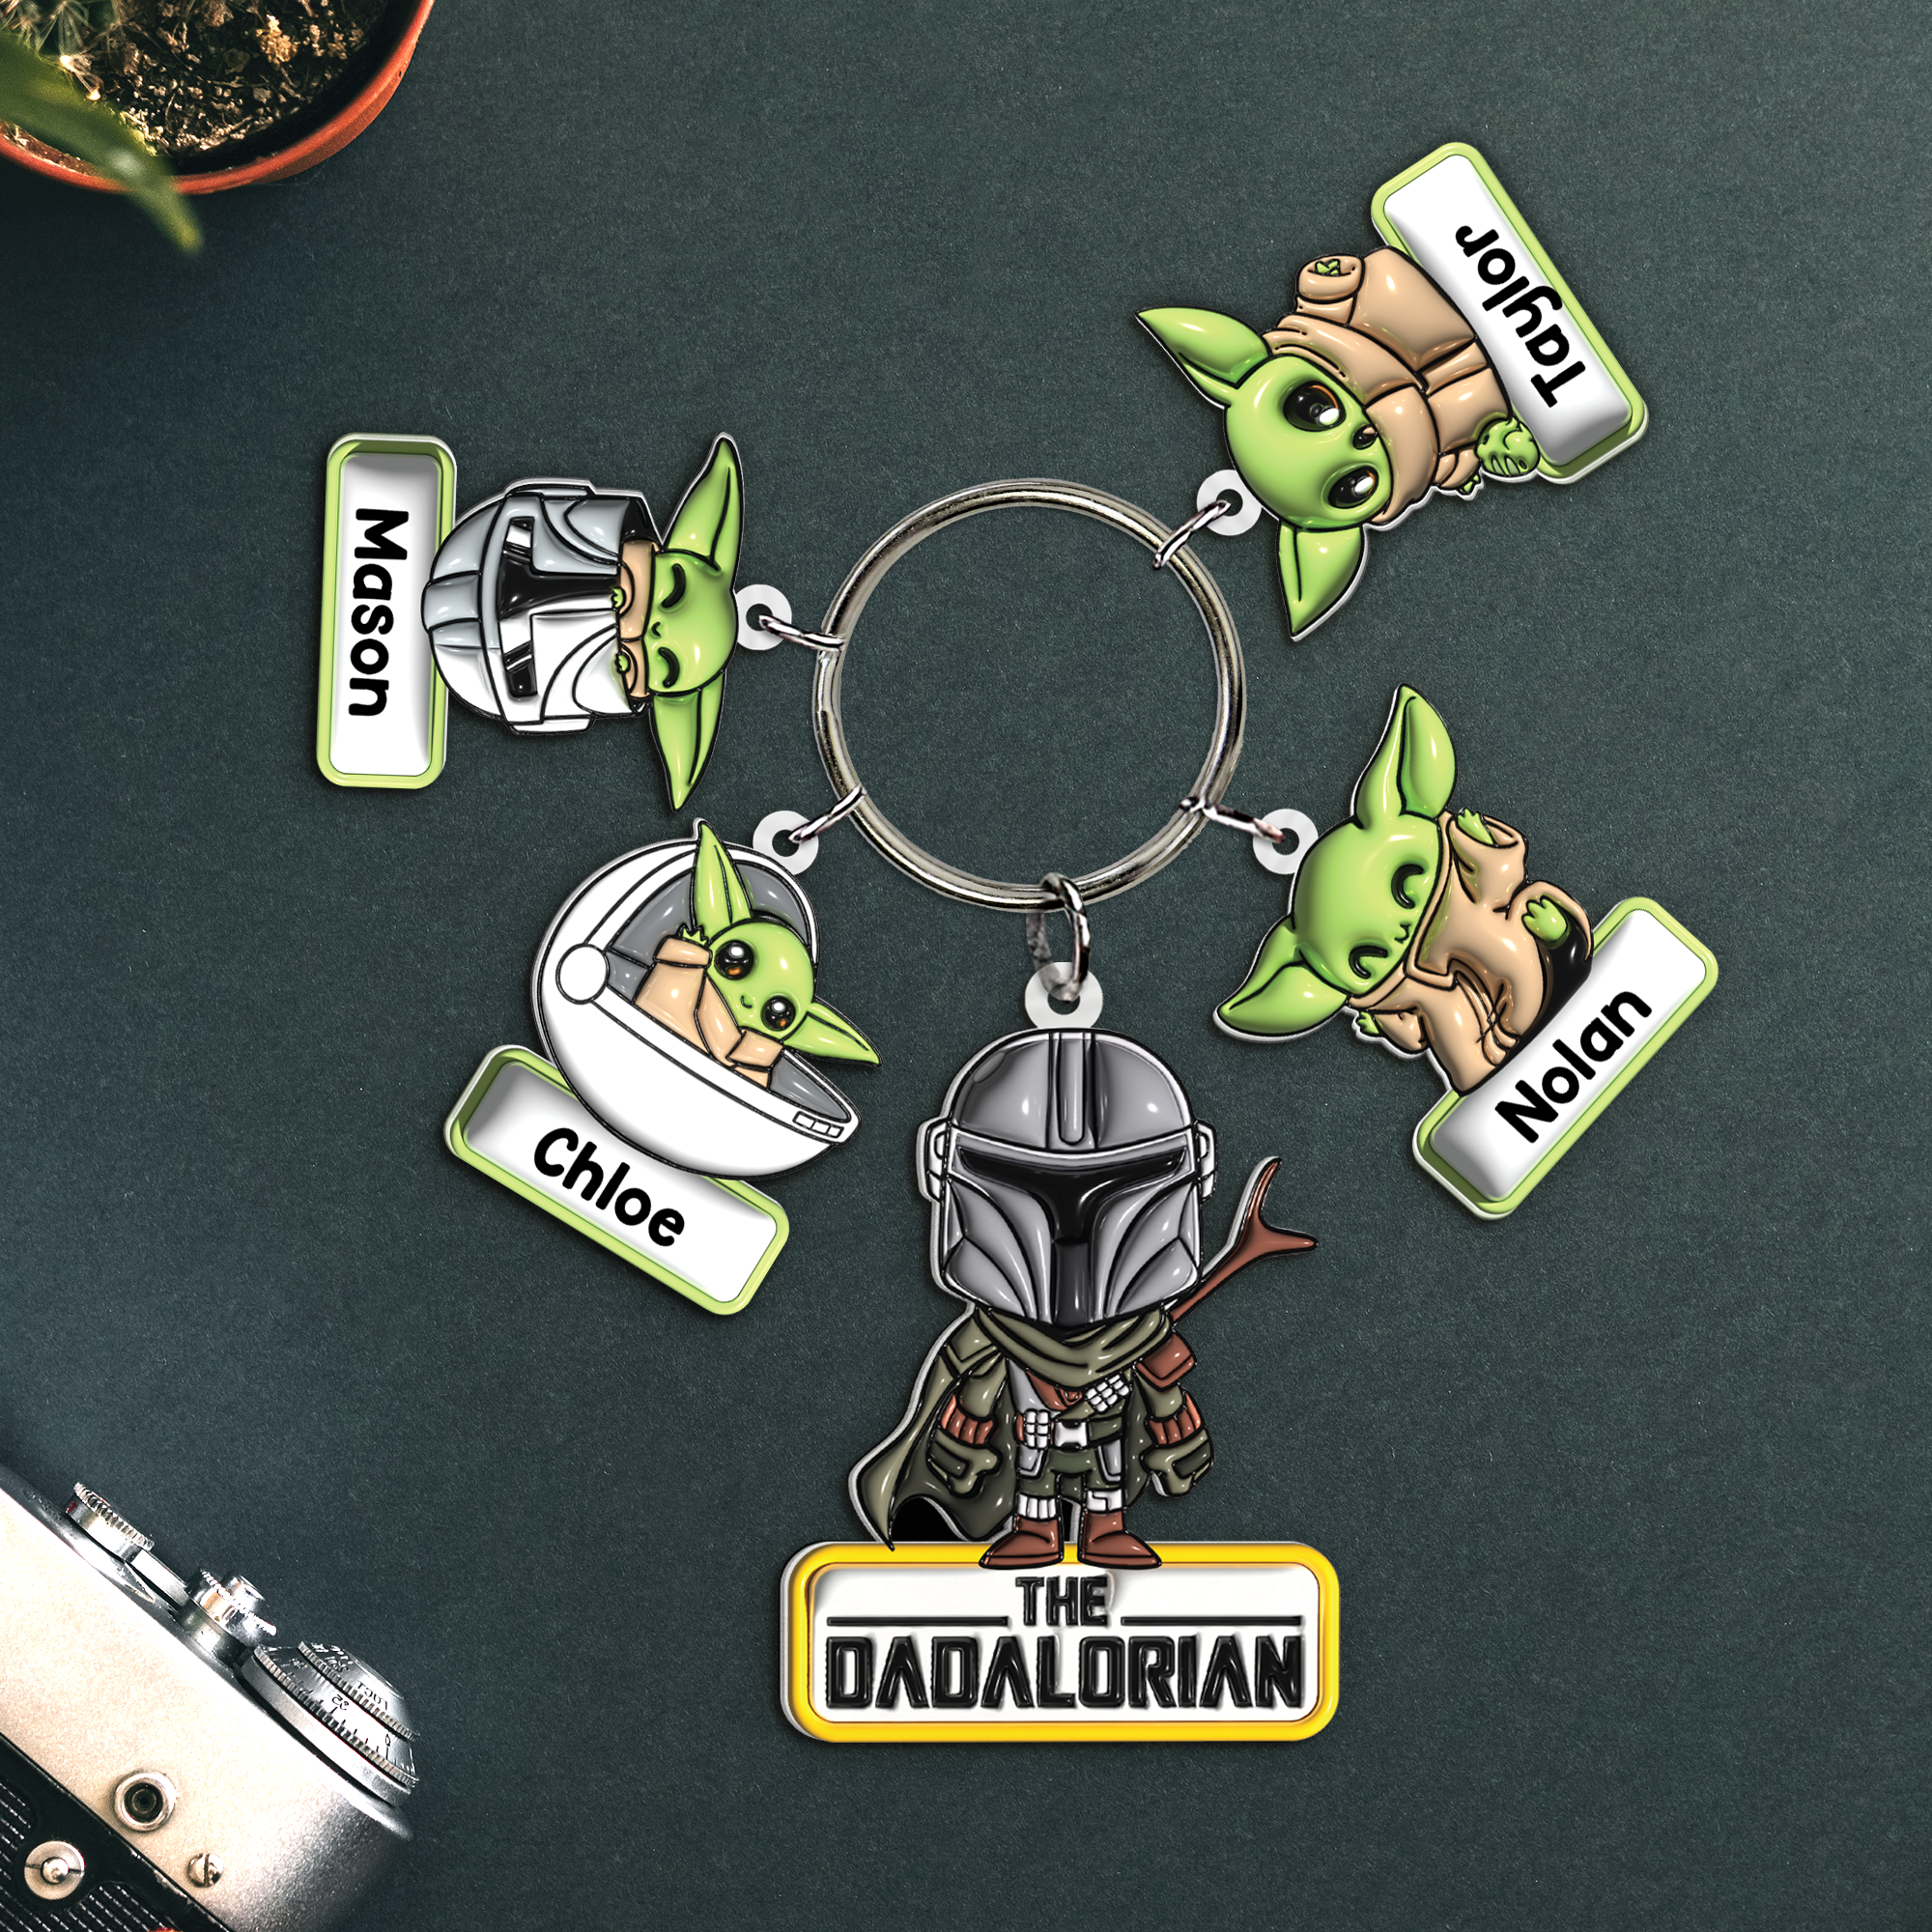 Personalized Gifts For Dadalorian Keychain With Baby Charms 01huhu230524-Homacus